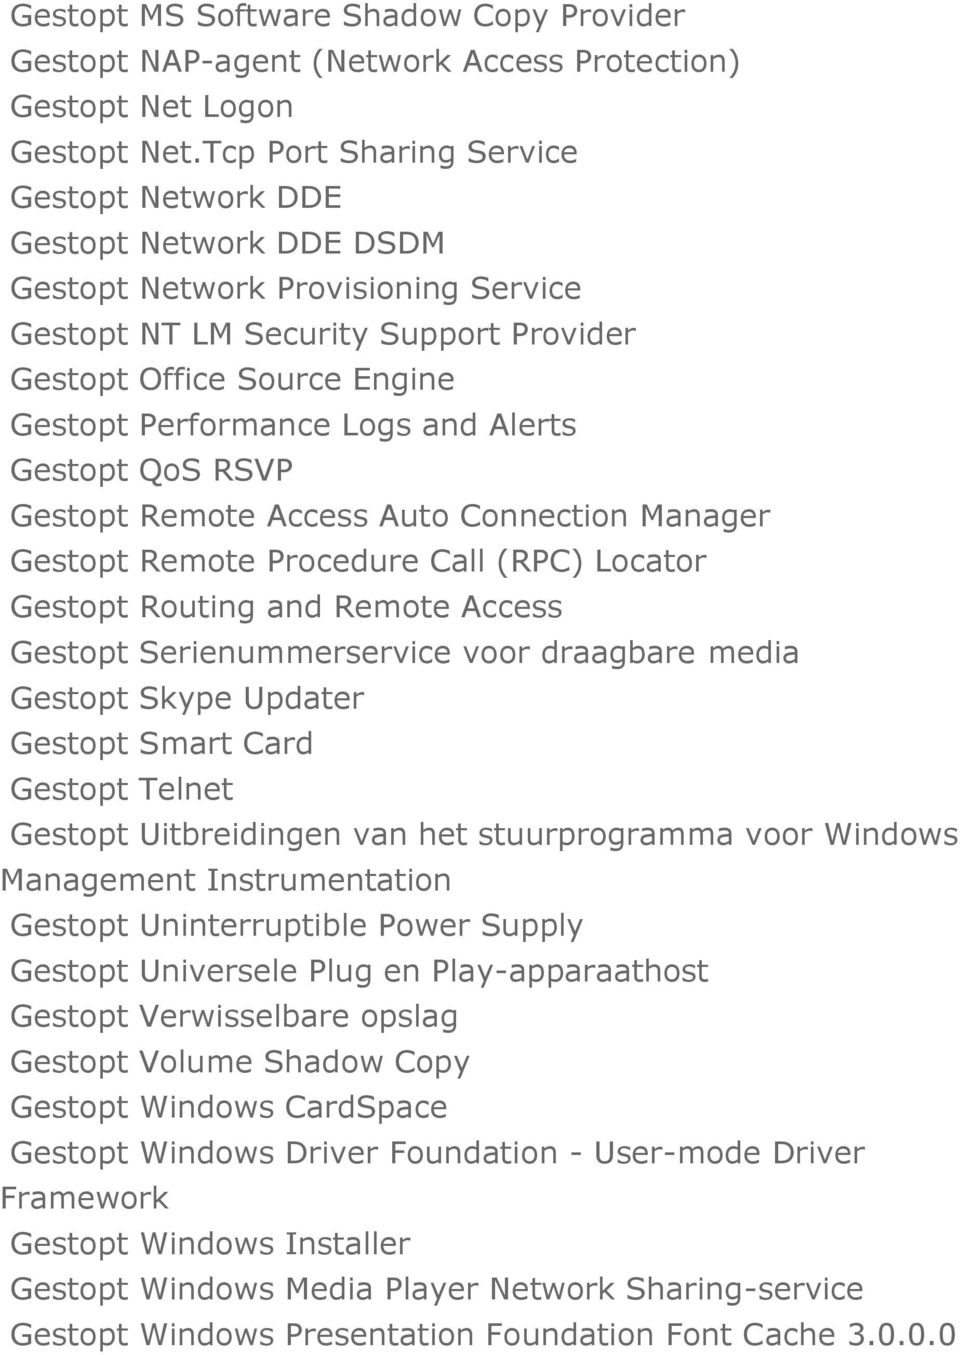 Logs and Alerts Gestopt QoS RSVP Gestopt Remote Access Auto Connection Manager Gestopt Remote Procedure Call (RPC) Locator Gestopt Routing and Remote Access Gestopt Serienummerservice voor draagbare